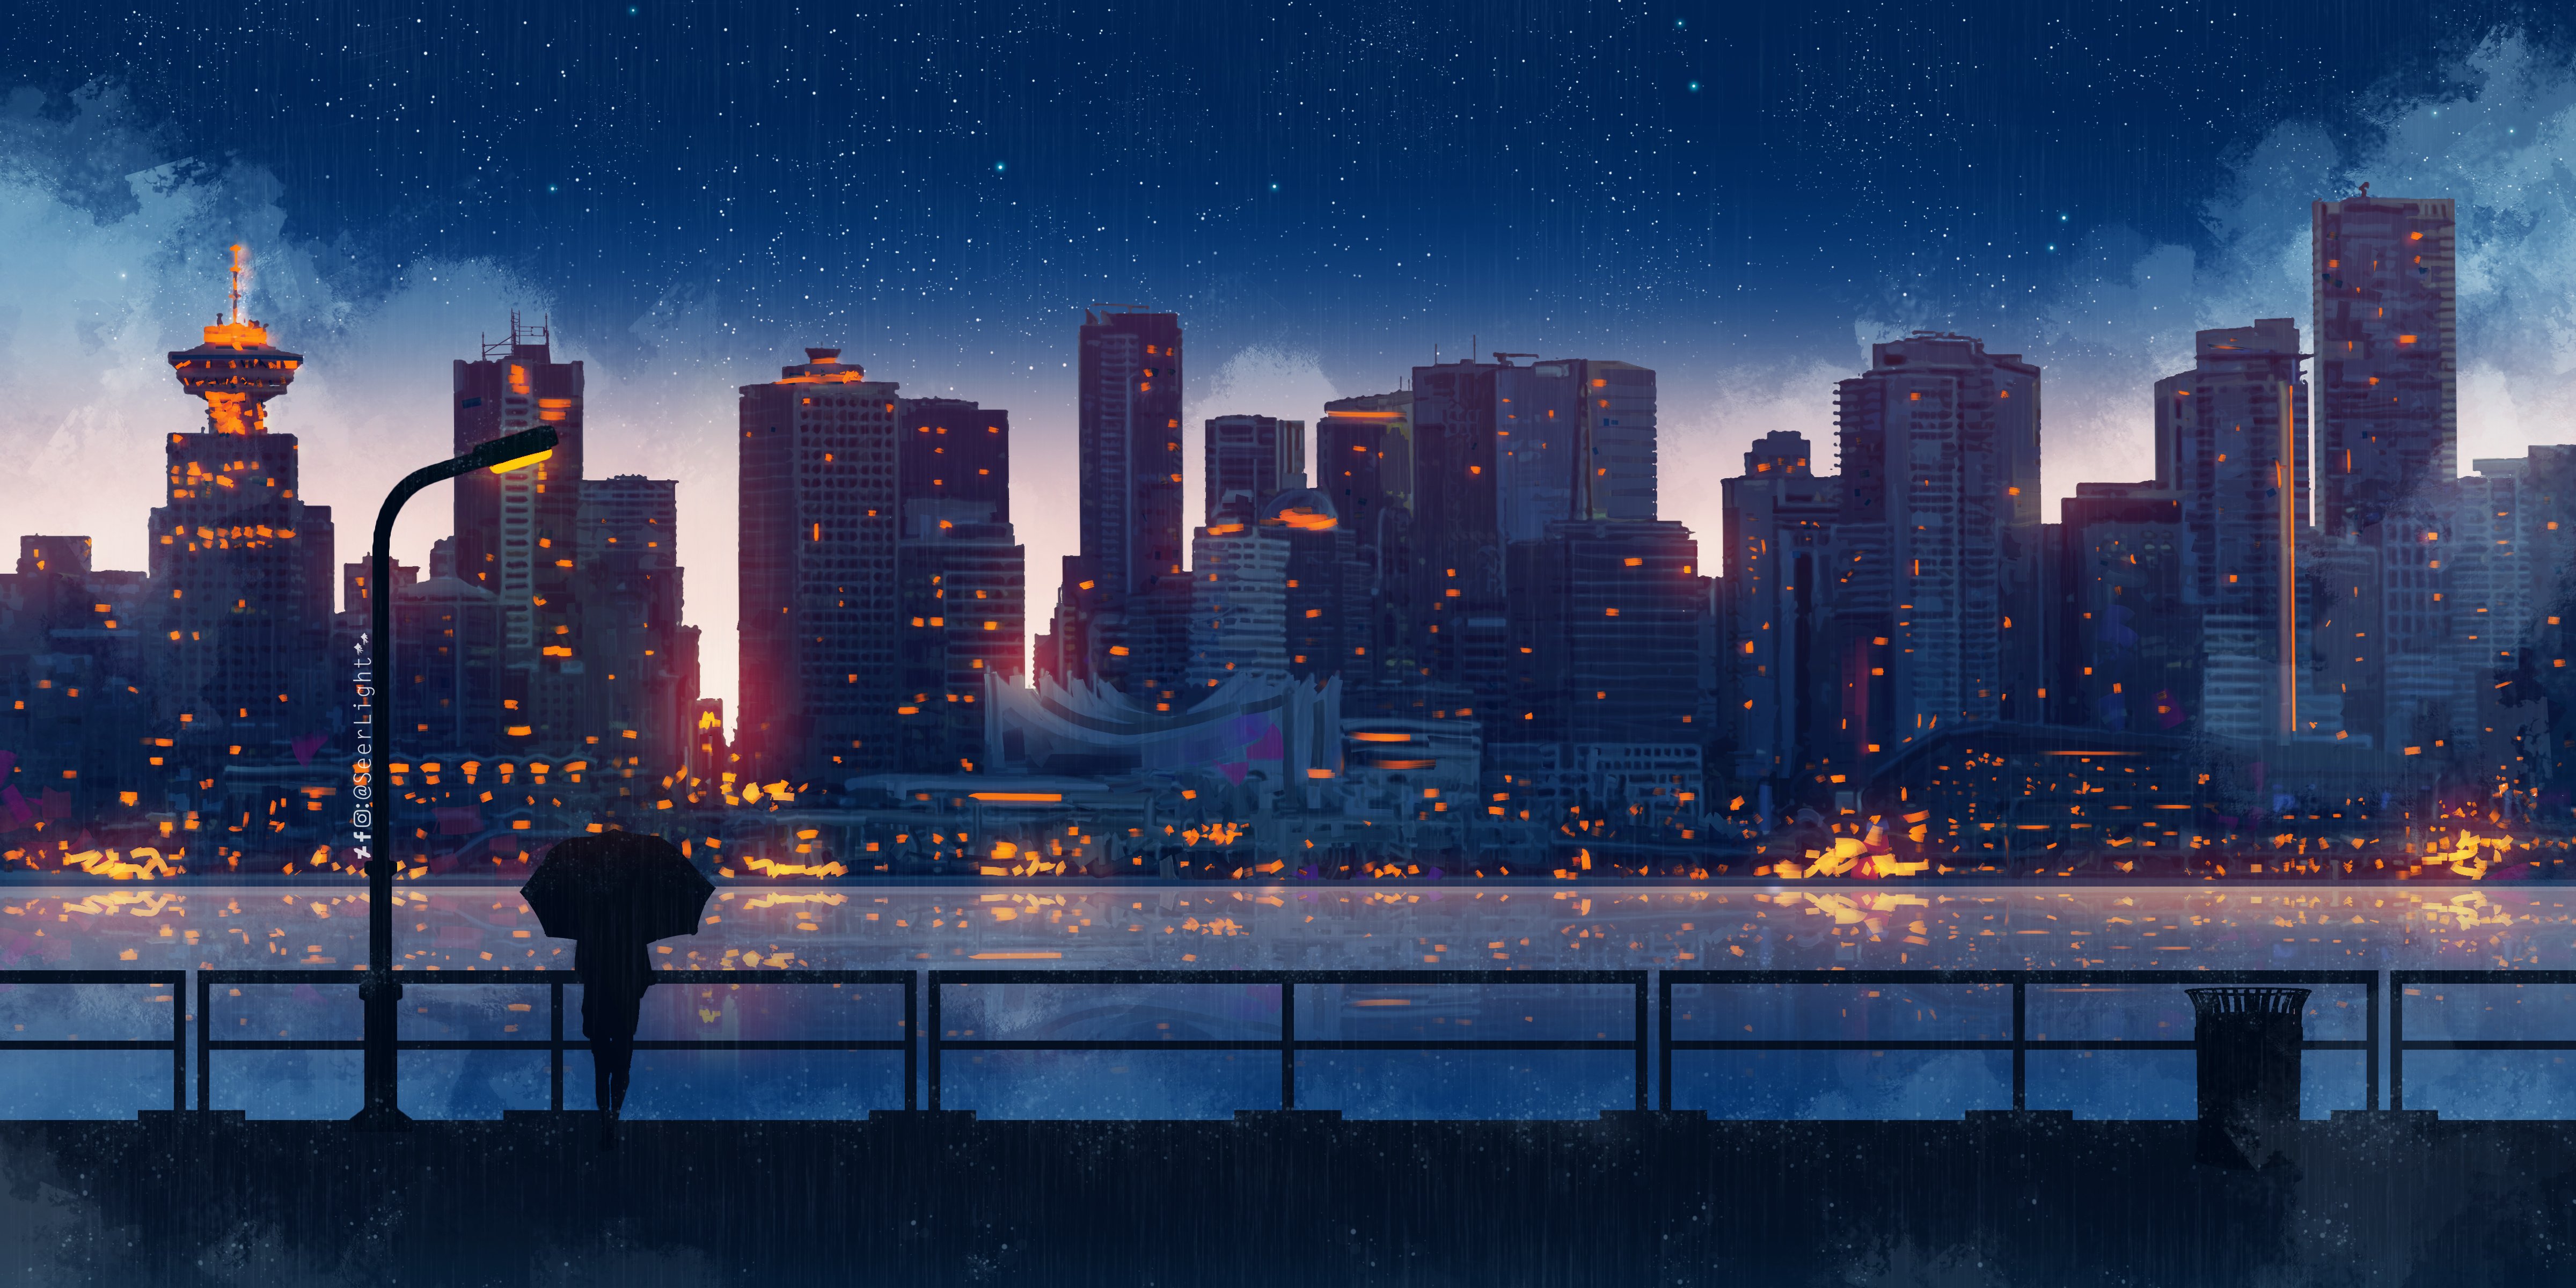 Wallpaper City at night anime style